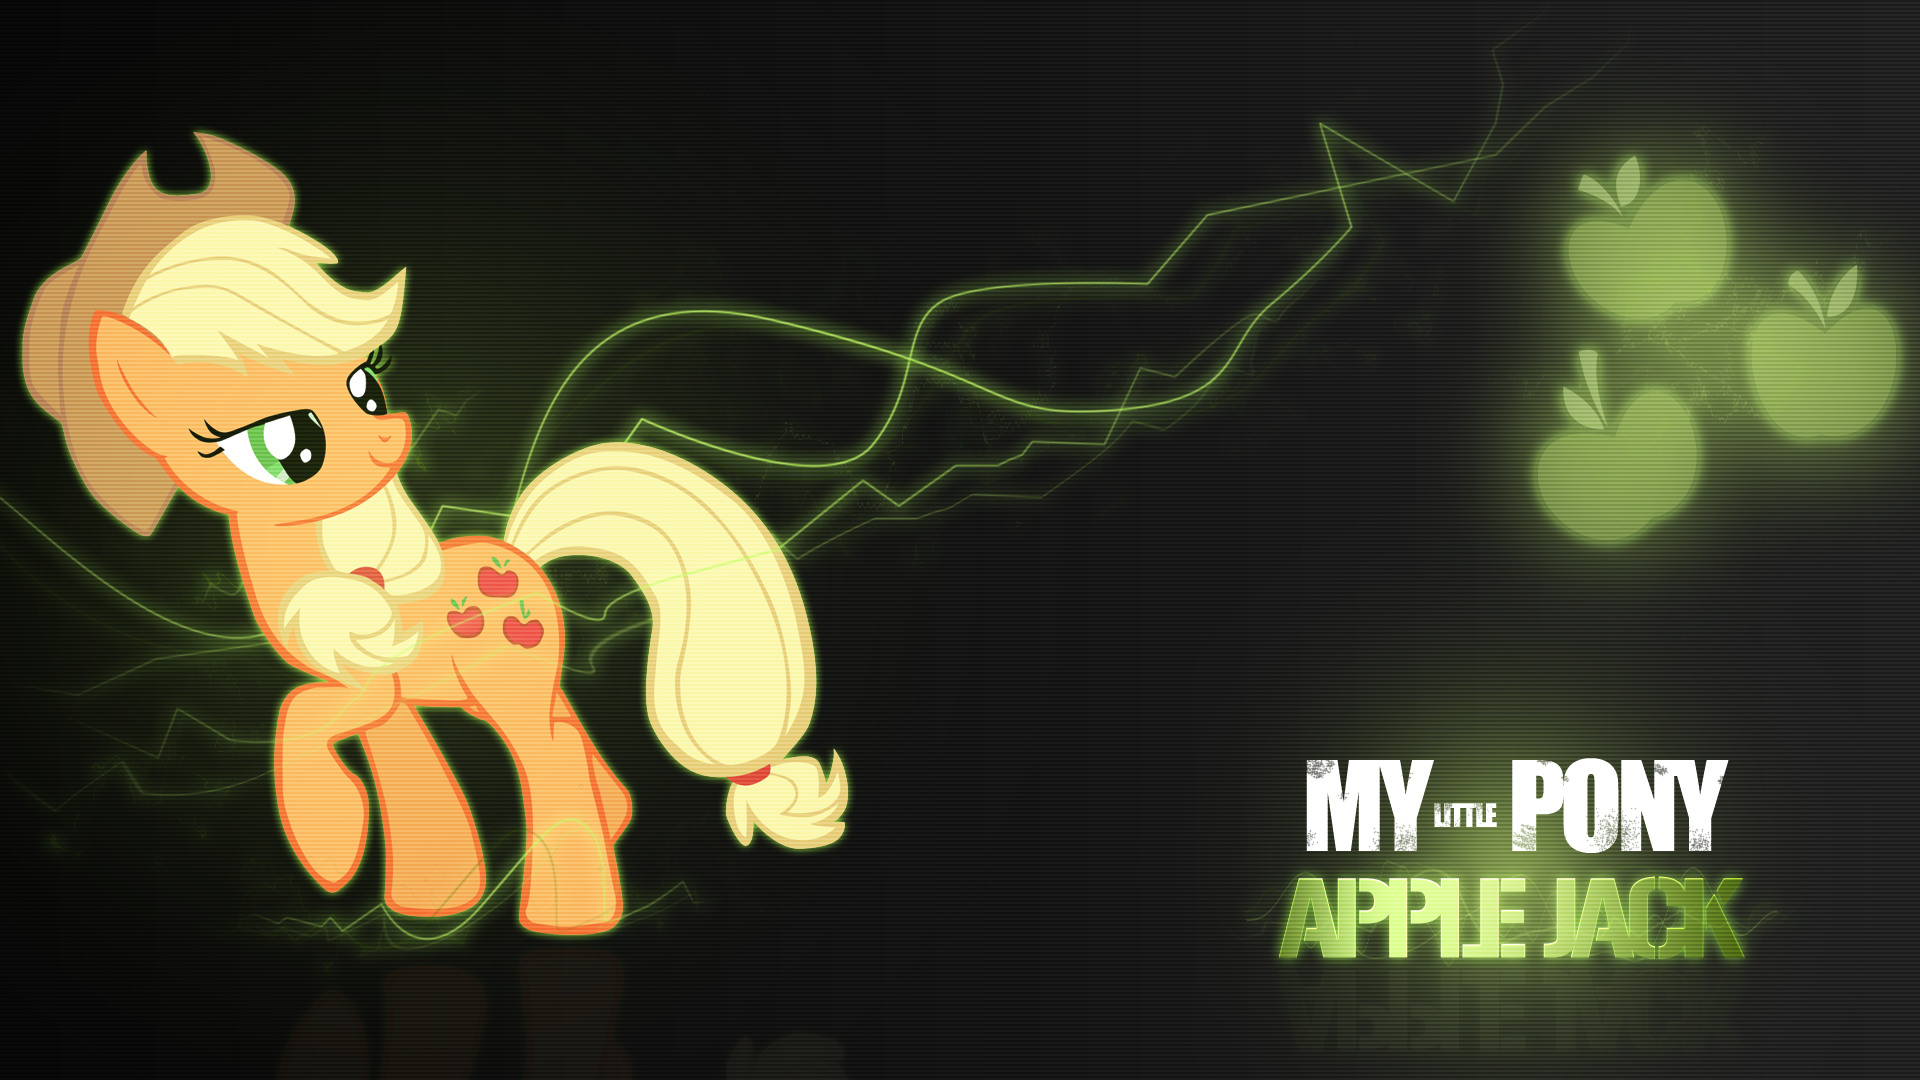 MWallaper - Apple Jack by AncientKale, BlackGryph0n and Mackaged